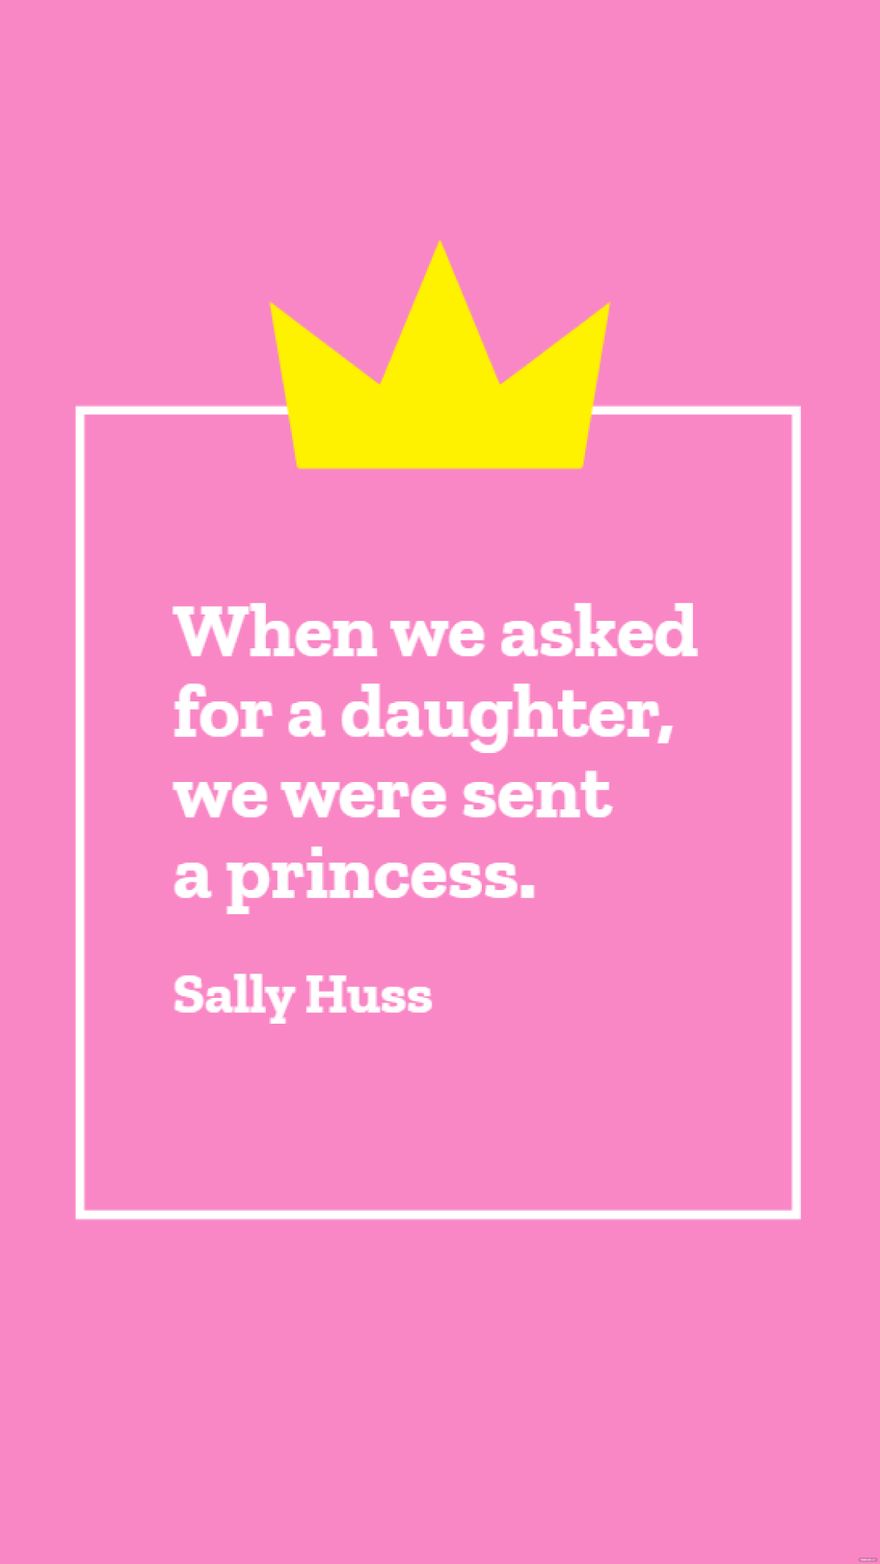 Free Sally Huss - When we asked for a daughter, we were sent a princess.